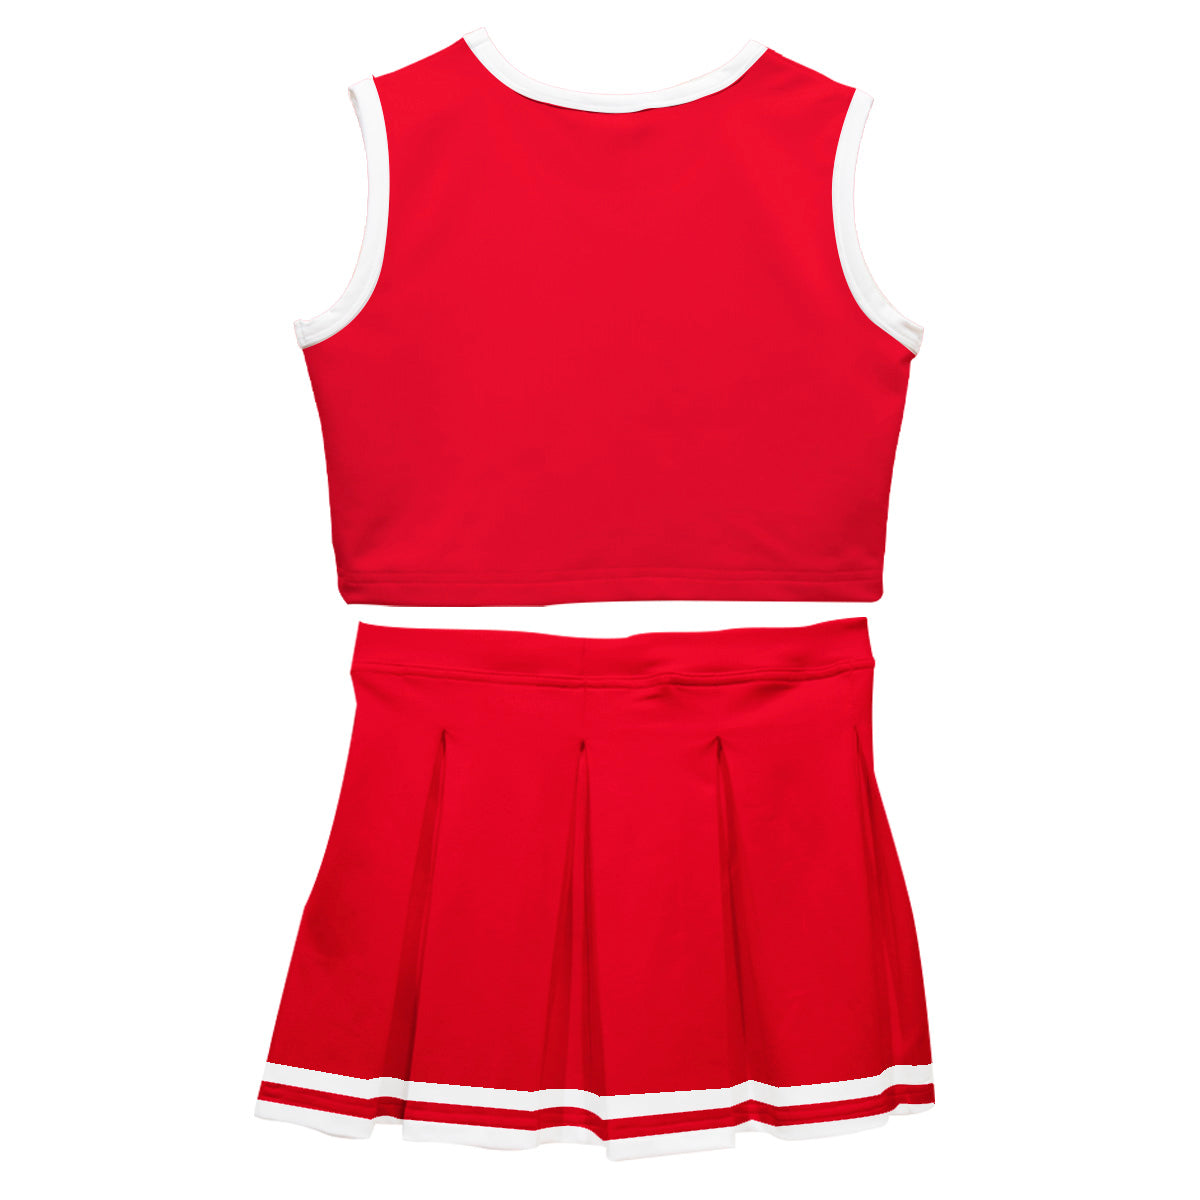 Red and White Sleeveless Cheerleader Set - Wimziy&Co.